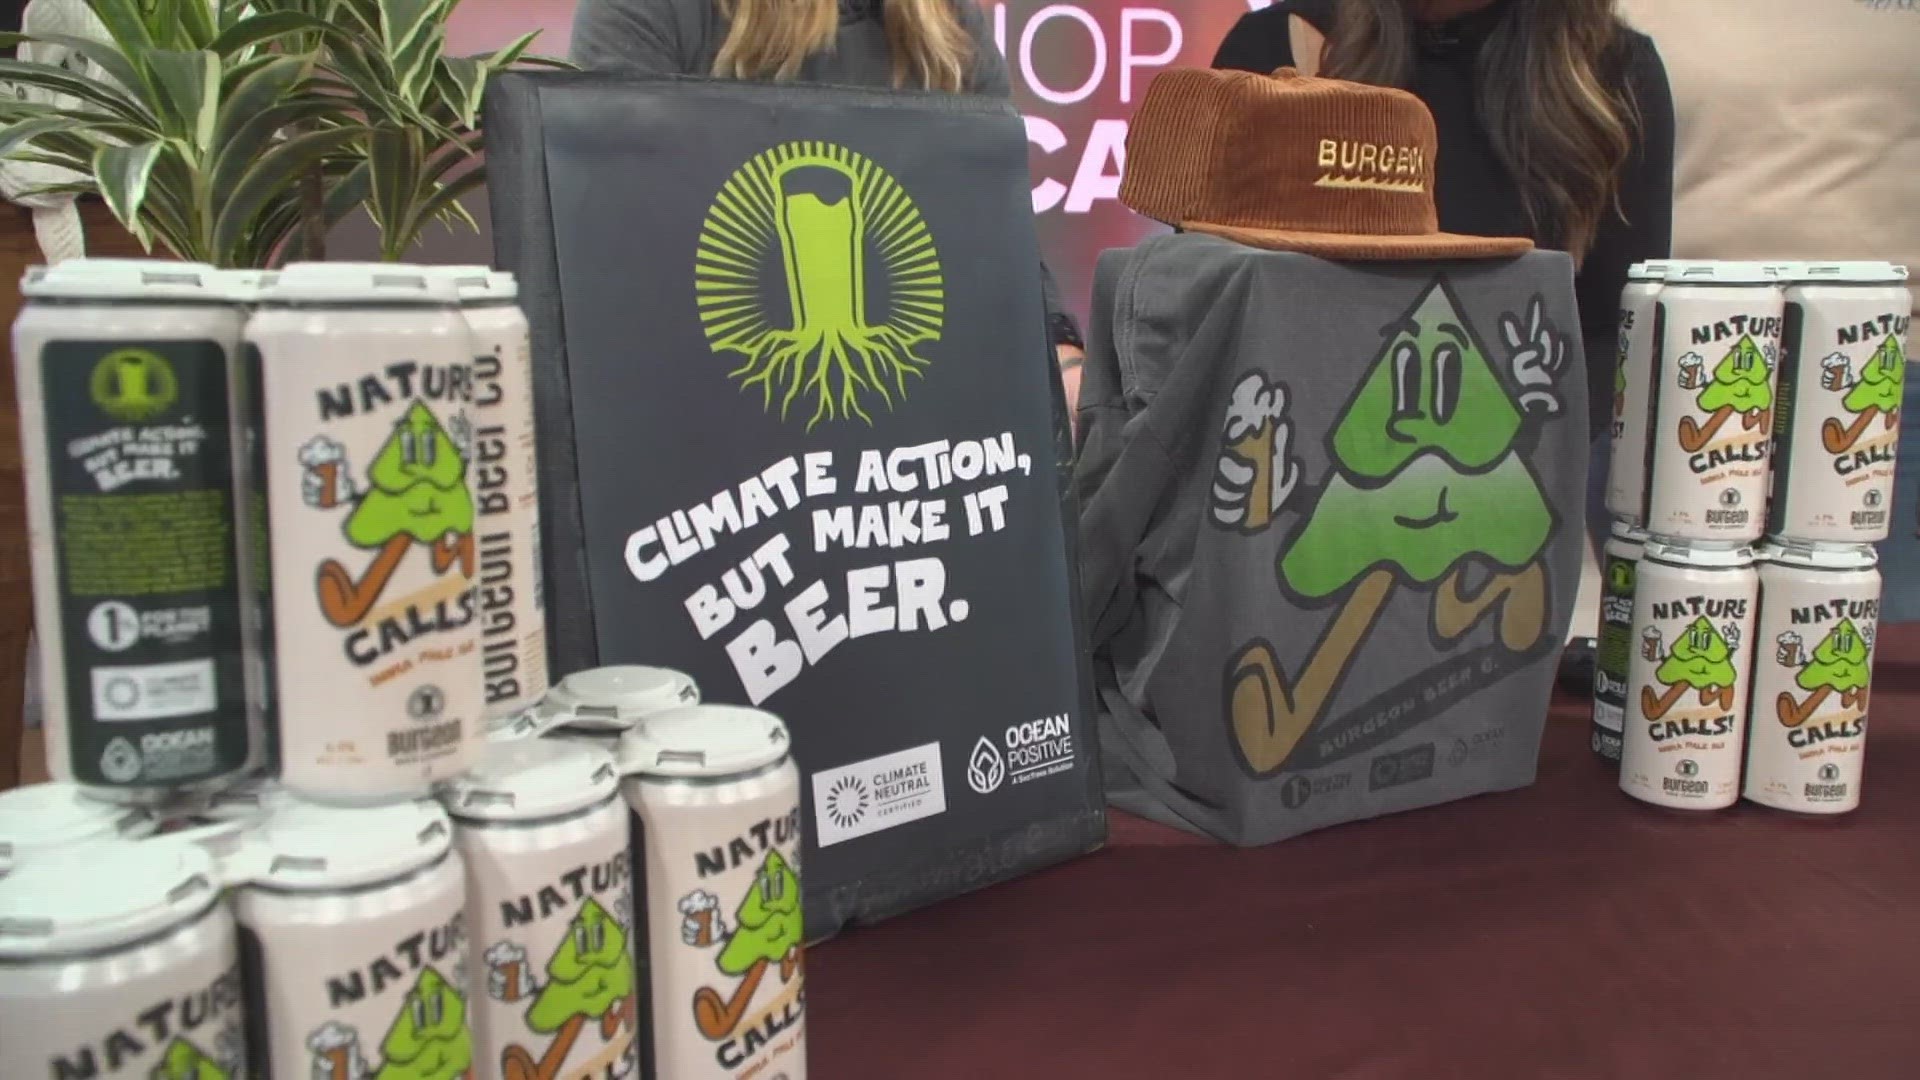 The Burgeon Beer Company is leading the way with the first-ever climate action partnership as it is the first brewery to triple-certify.